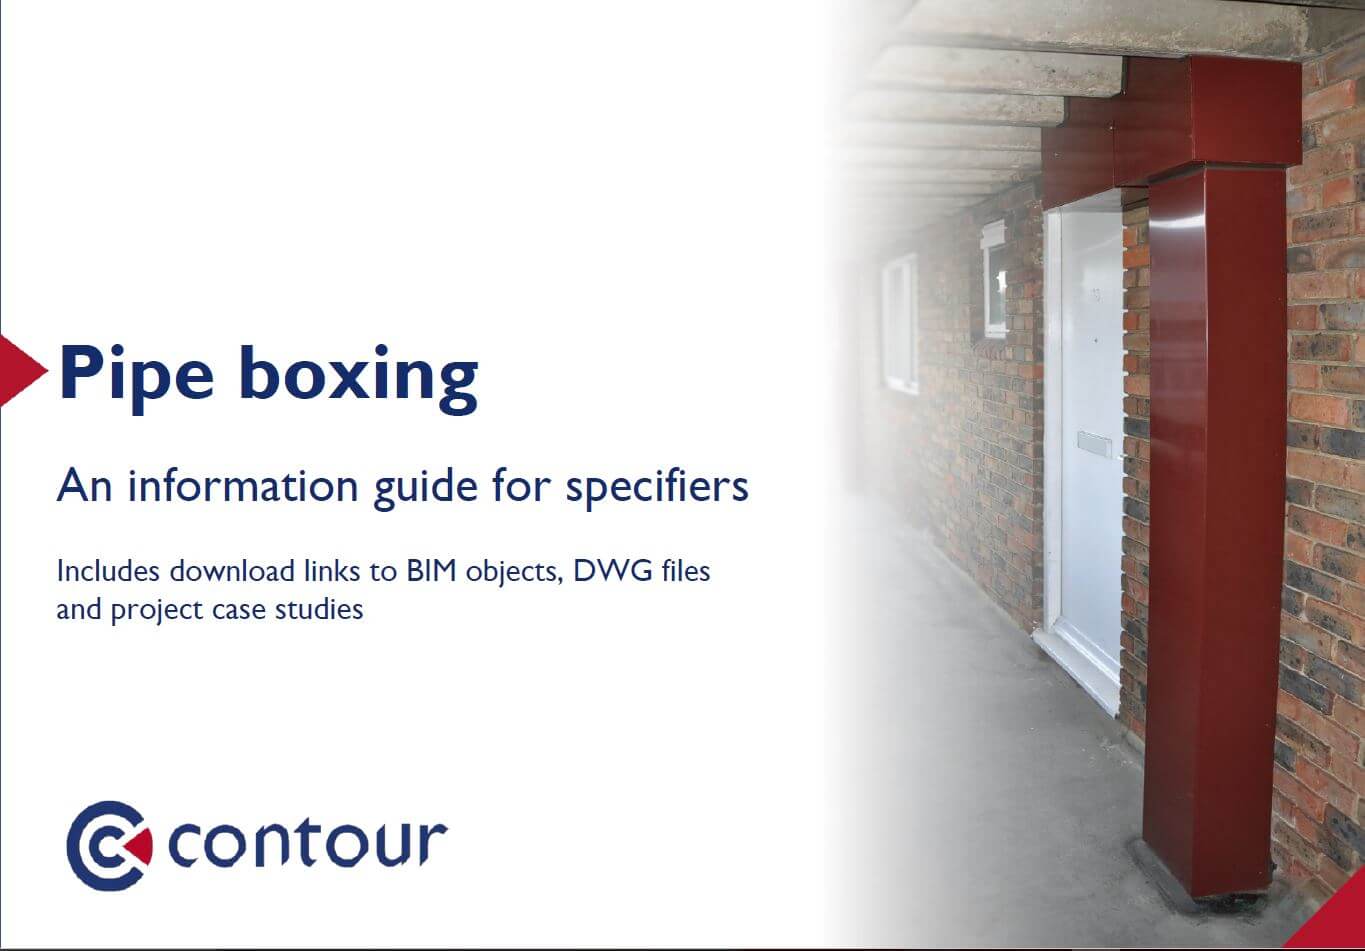 Pipe boxing – An information guide for specifiers